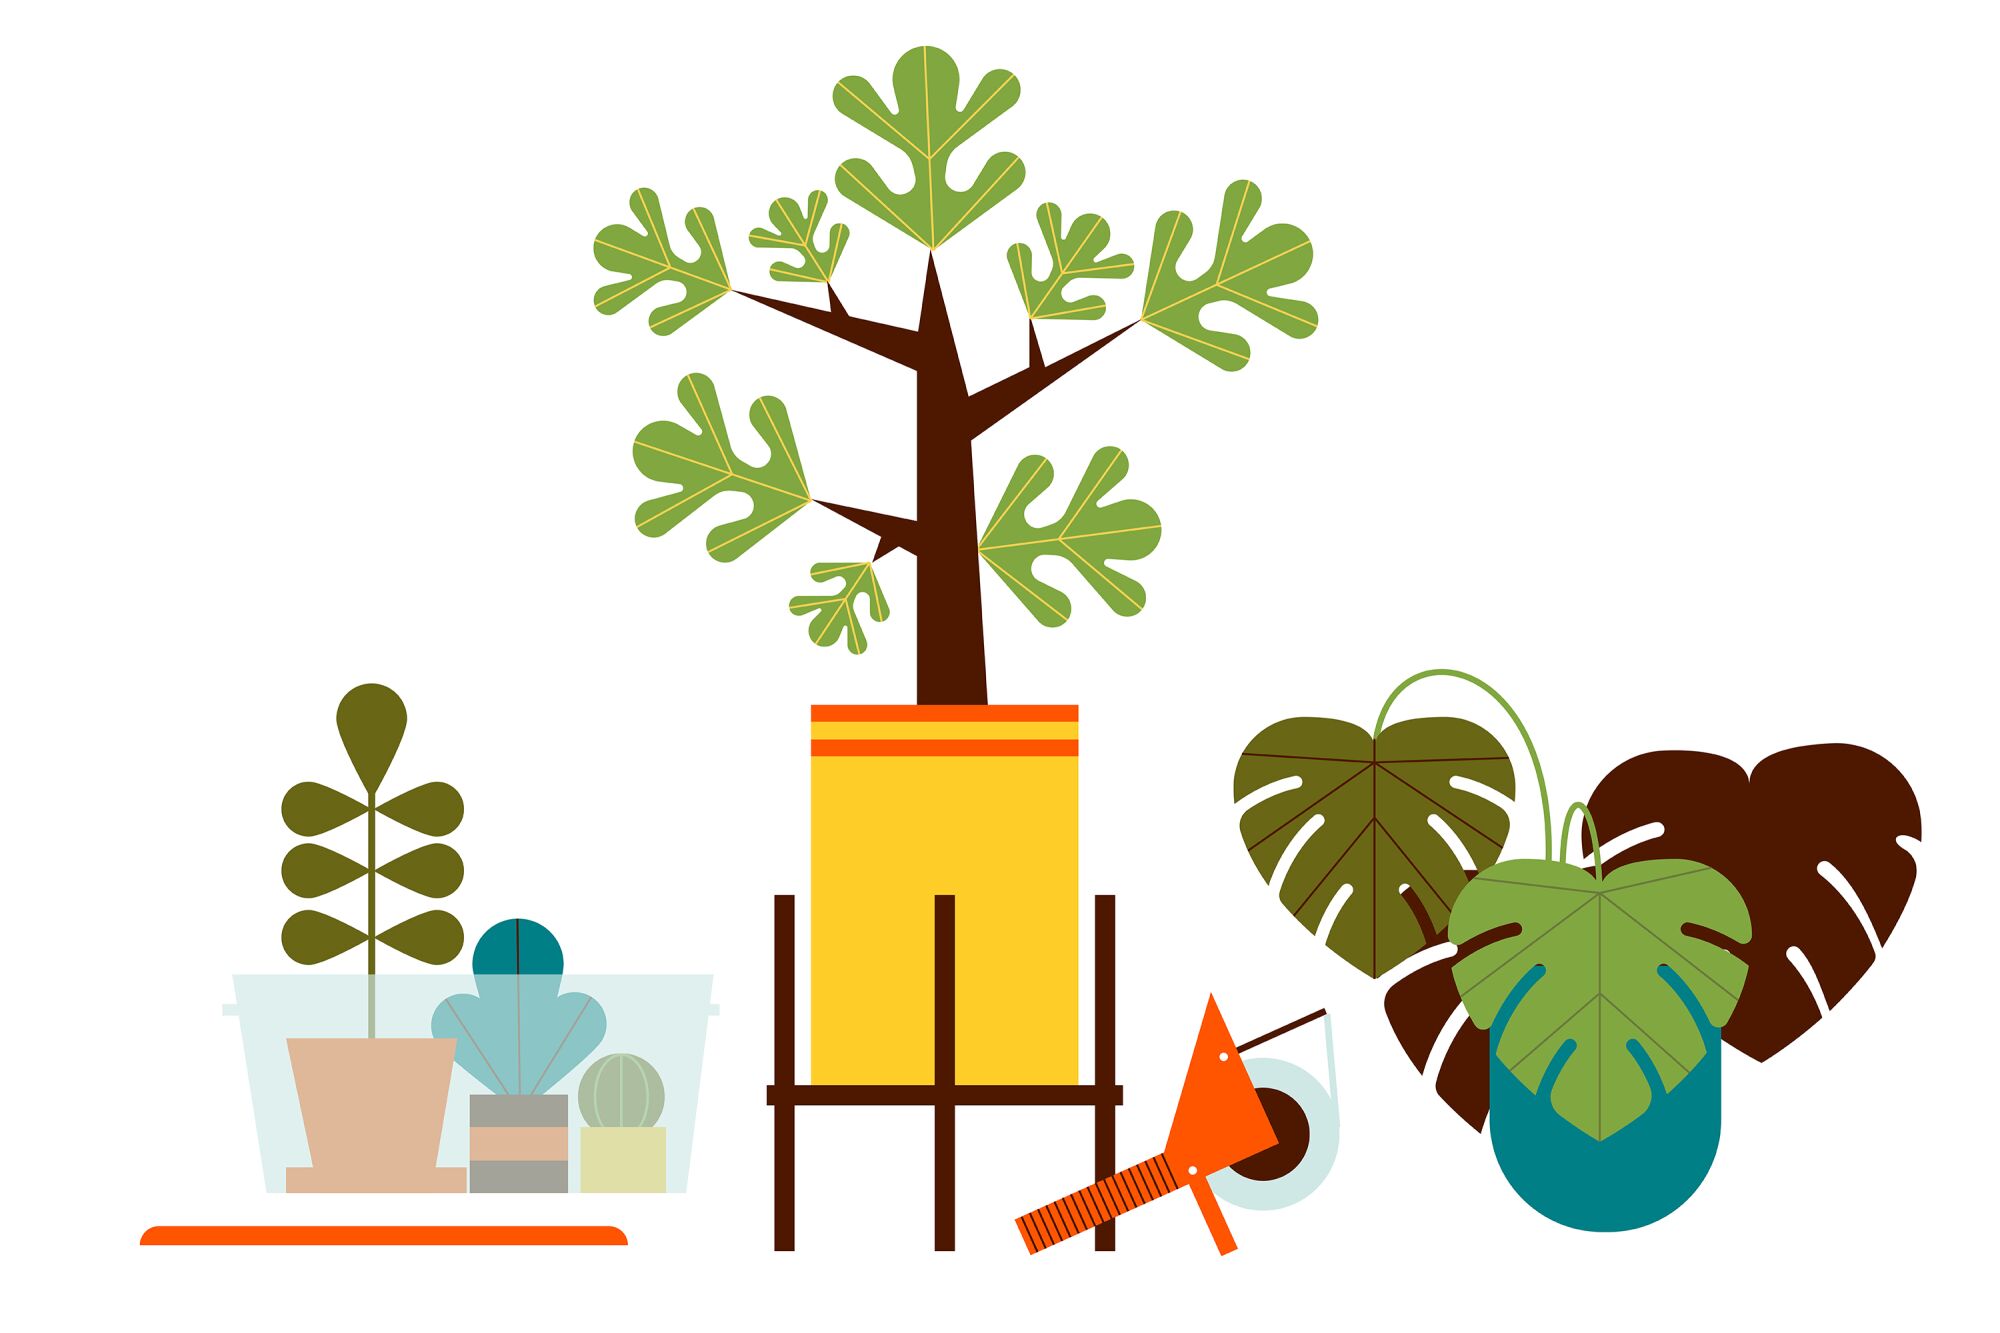 Illustration of plants being packed in bins and boxes.